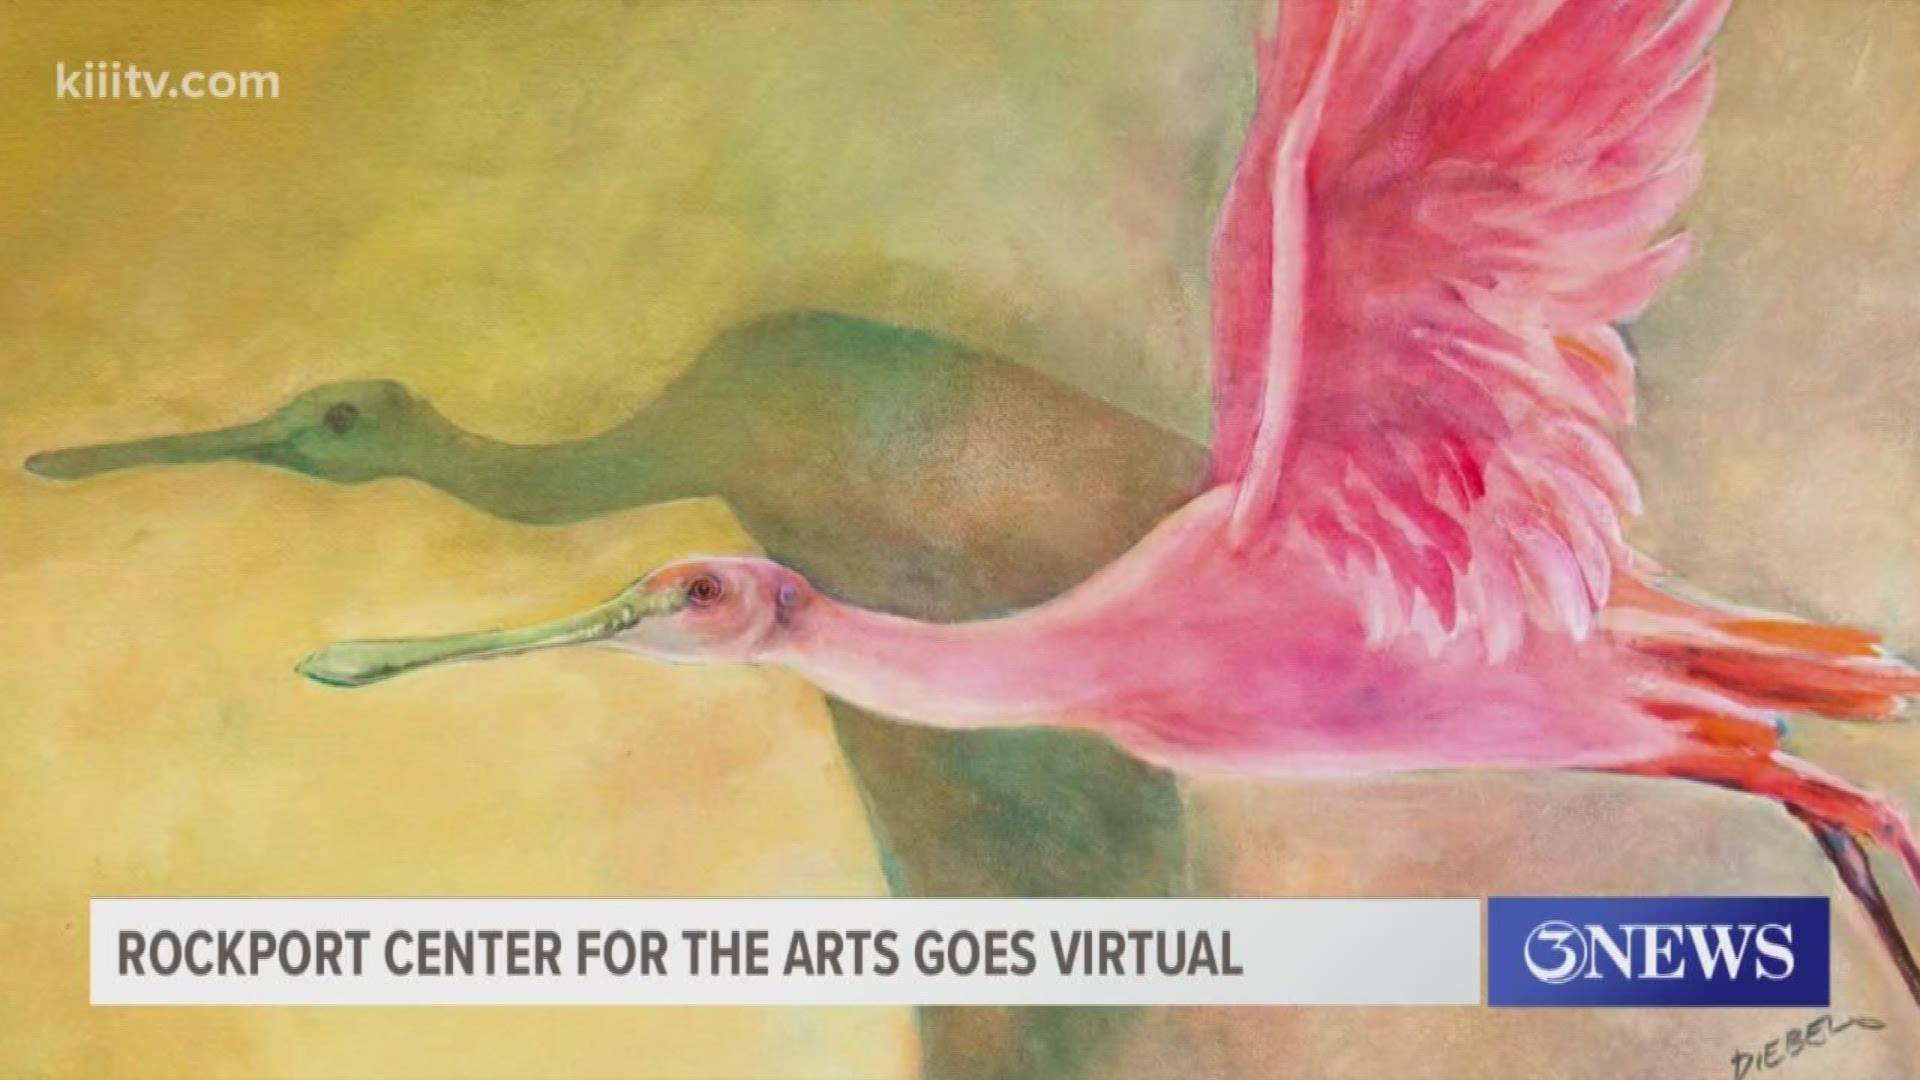 The center's studio tour was supposed to take place over the weekend in Rockport and feature 25 artists, but like so many other events, it had to be put on hold.